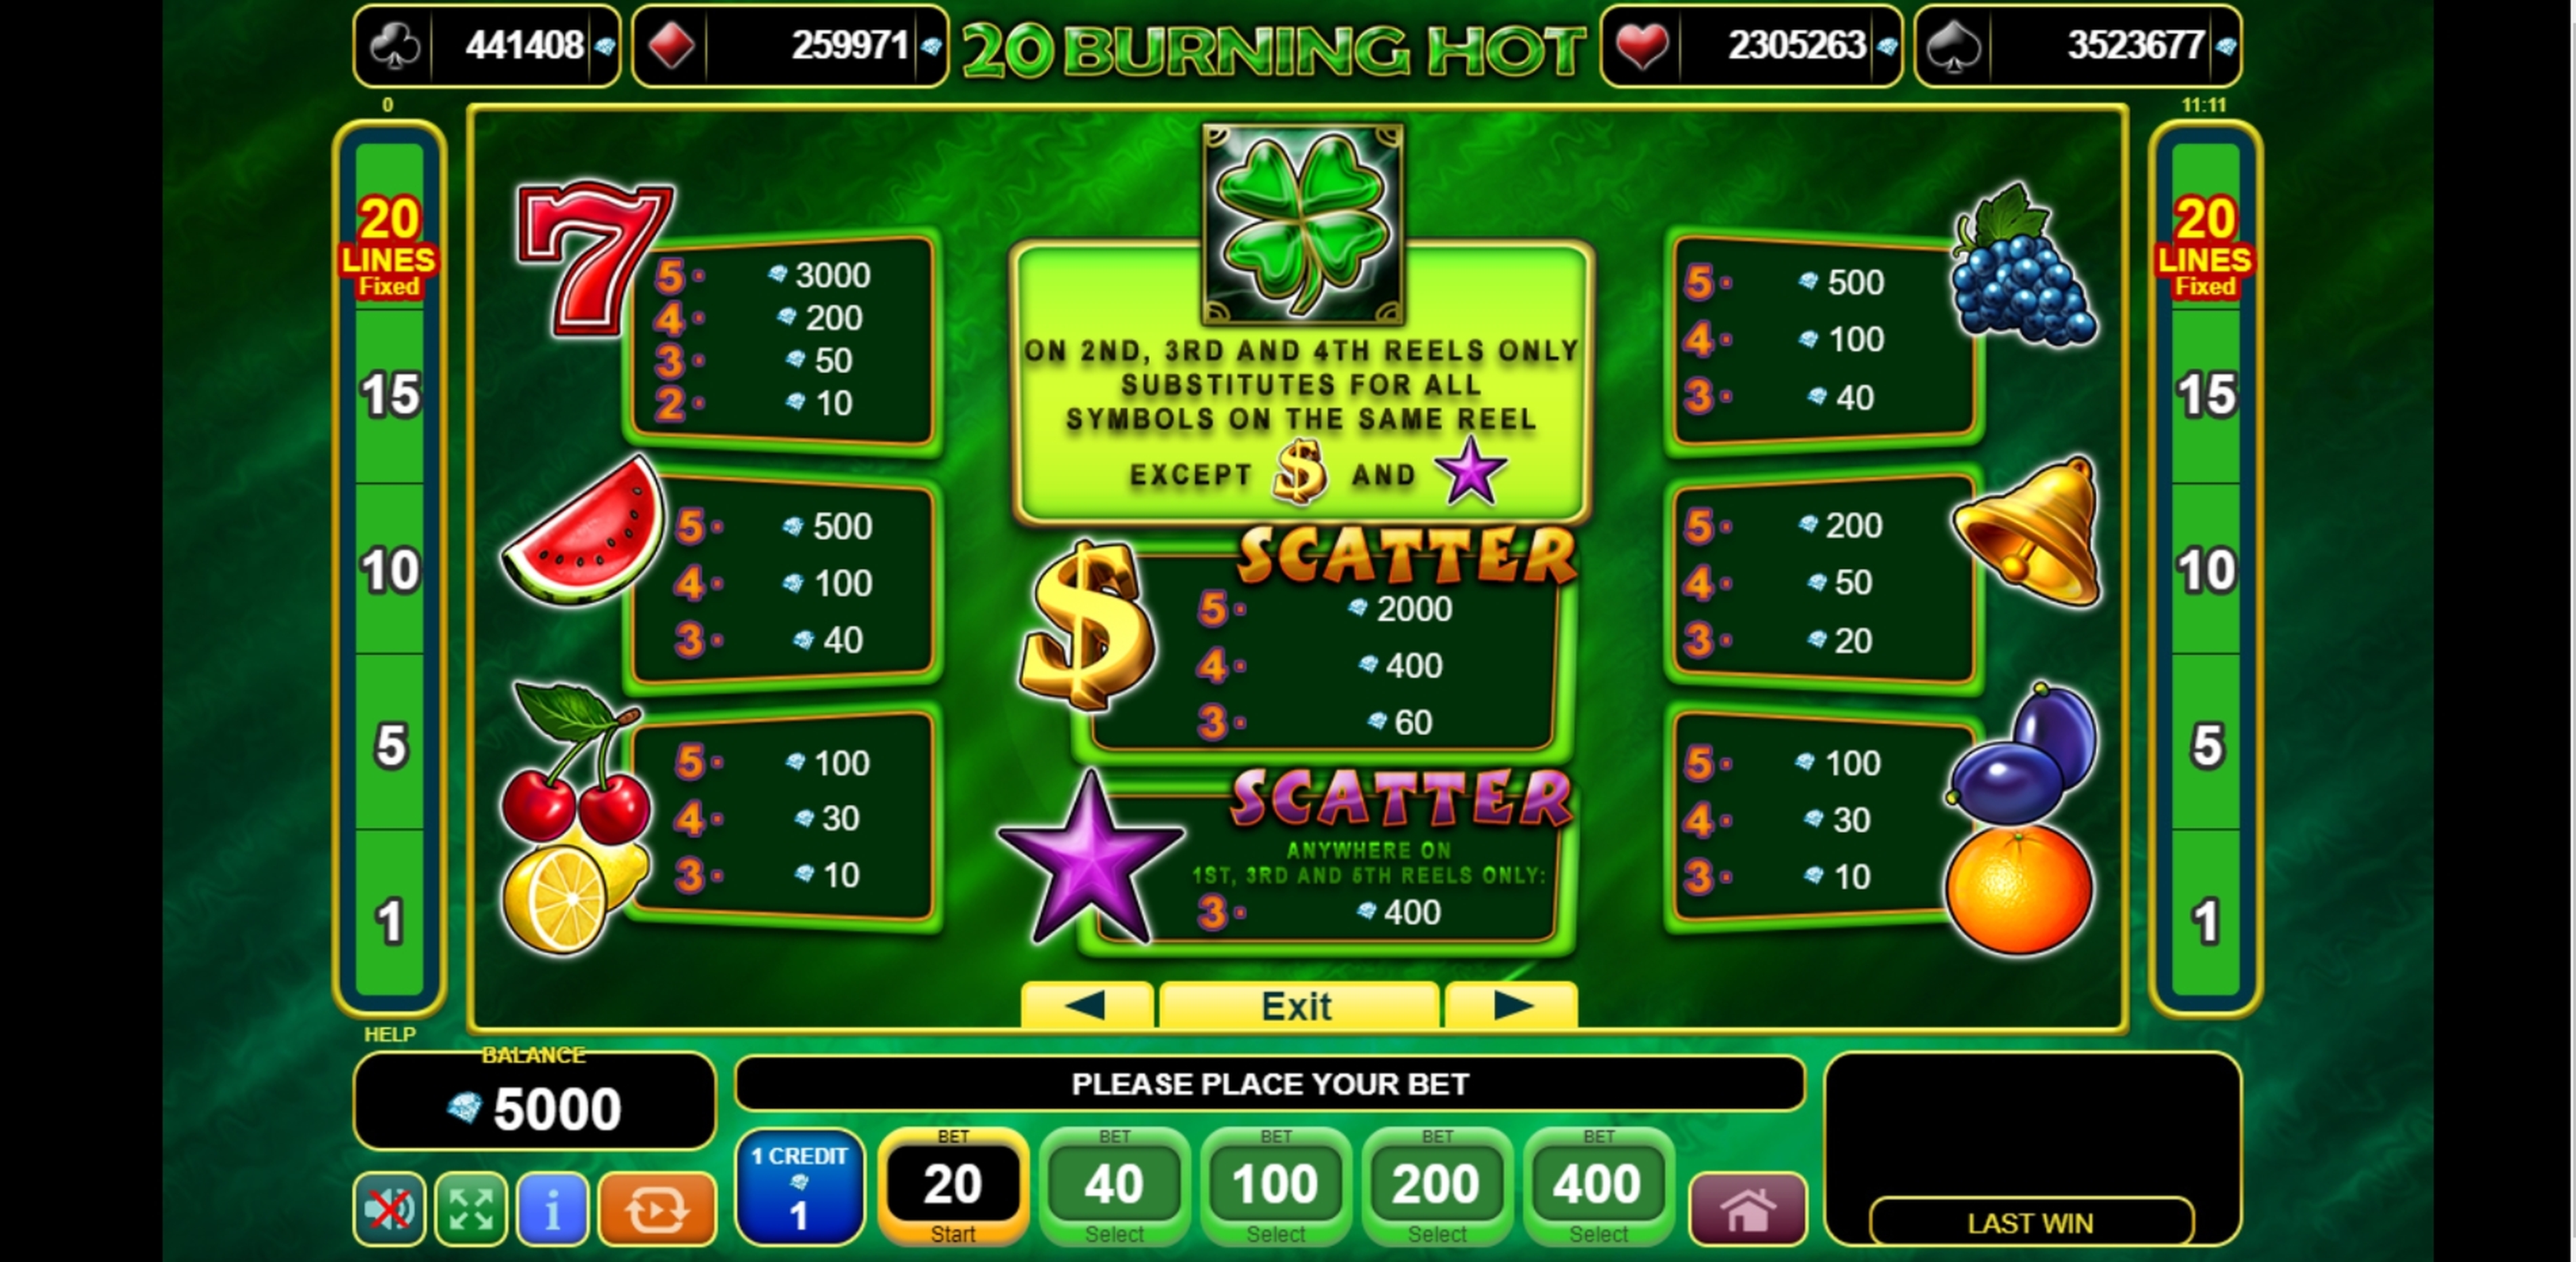 Info of 20 Burning Hot Slot Game by EGT